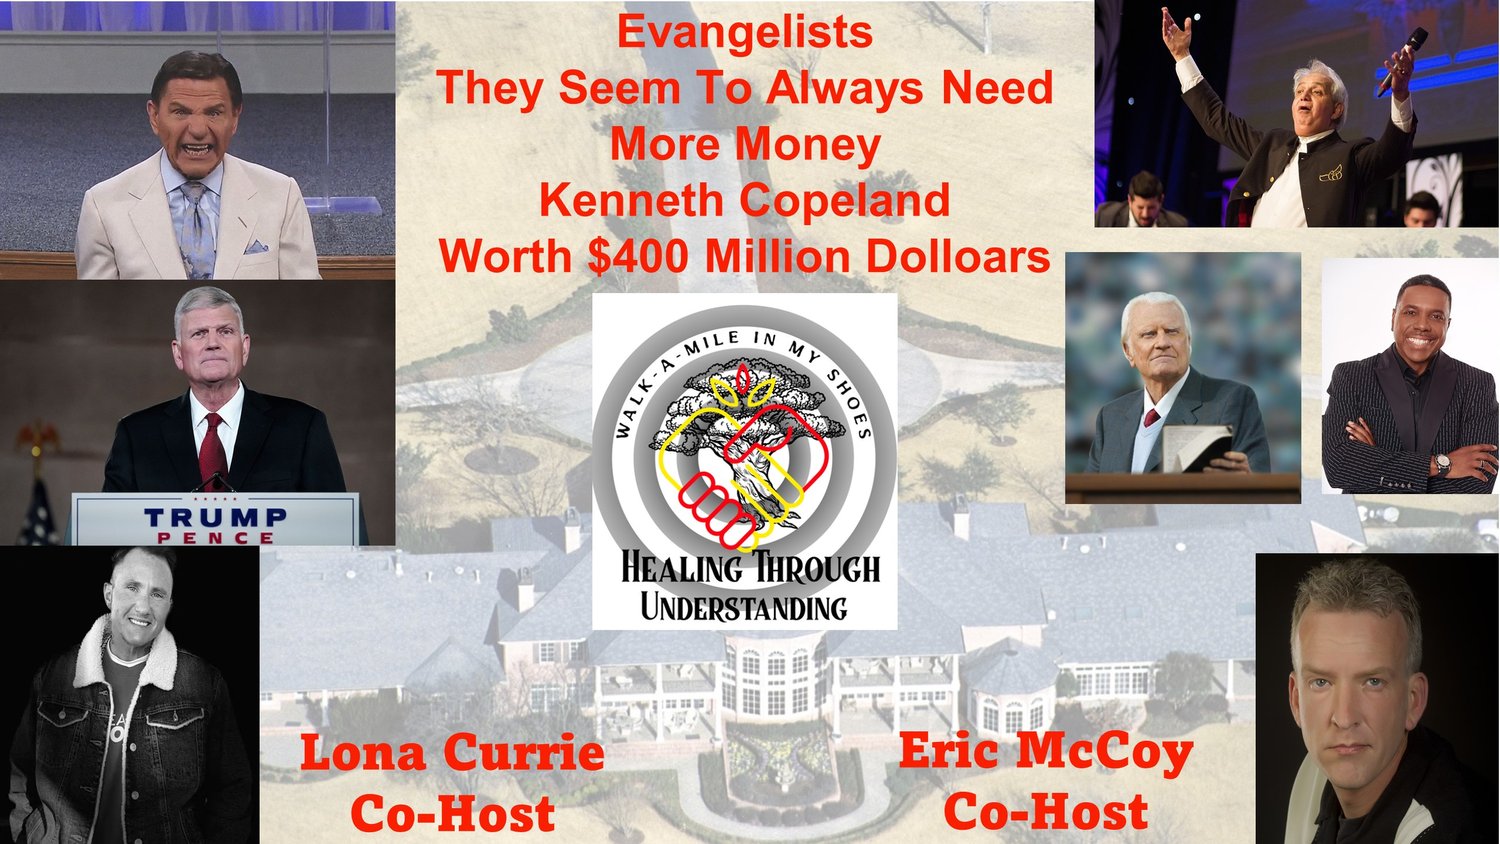 The Evangelists Who Need More Money. Are They of God, Thieves, or Great Manipulators